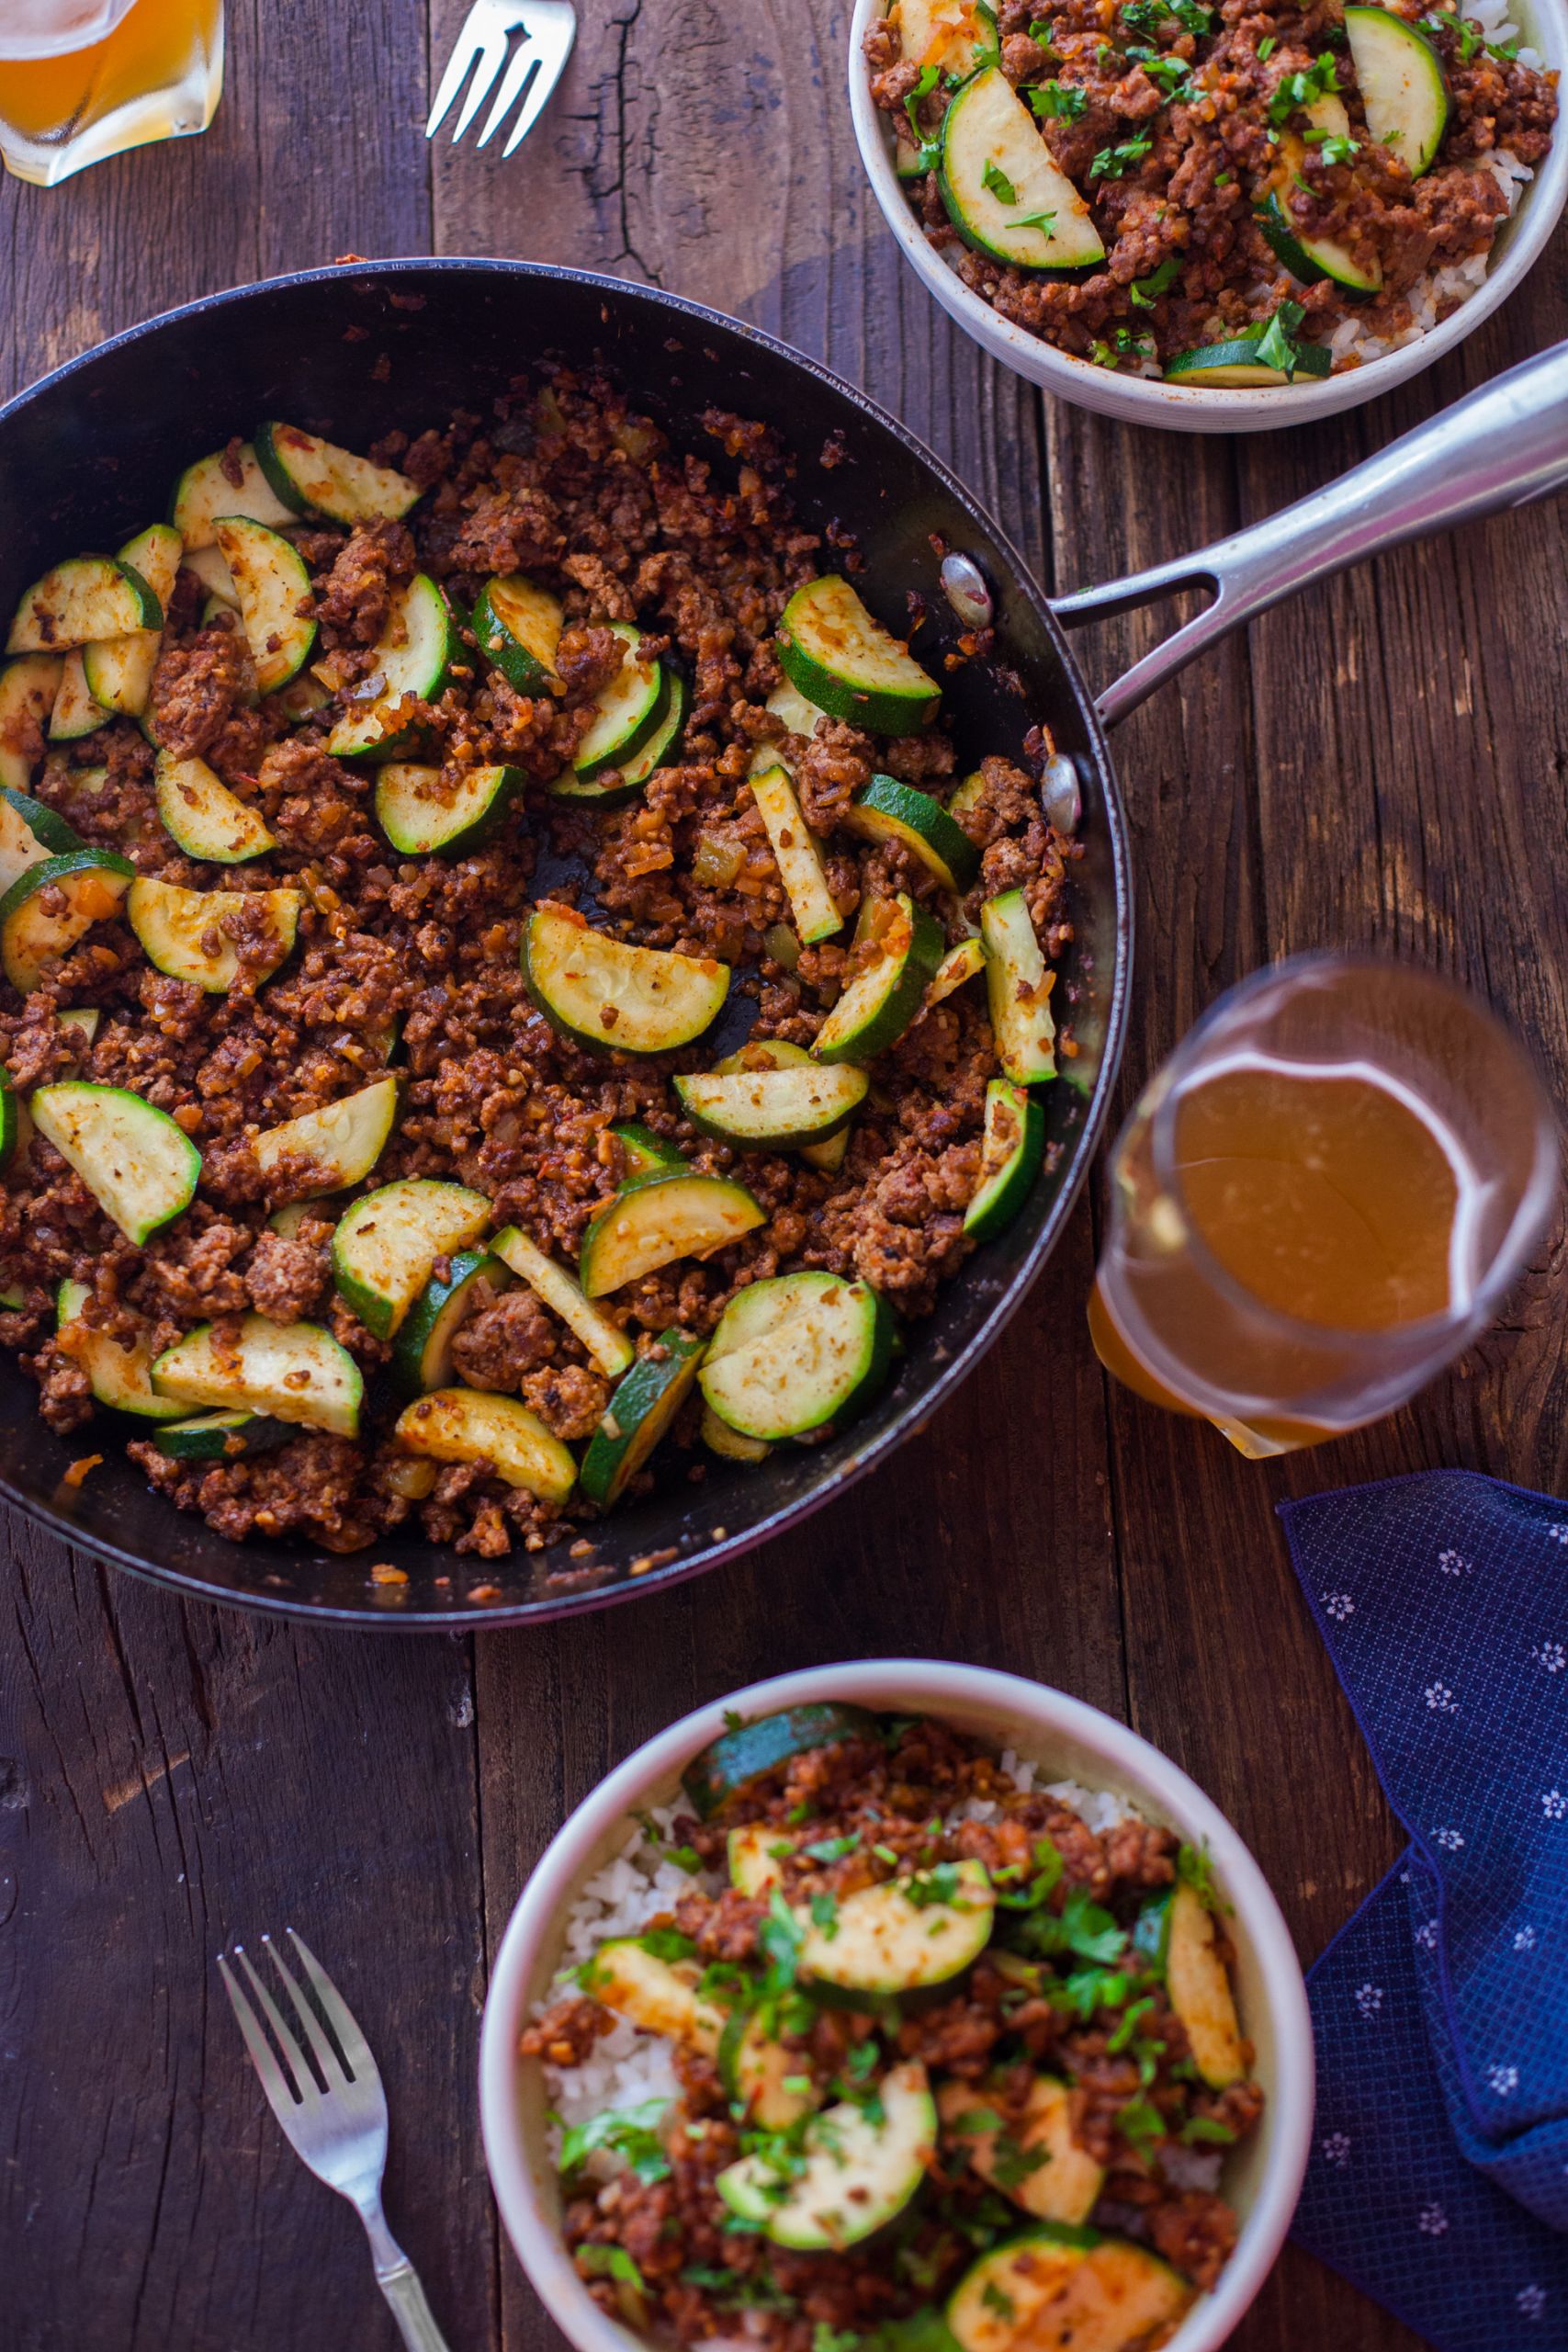 Dinner For One Recipes
 Zucchini Beef Skillet Recipe a e Pot Paleo Dinner